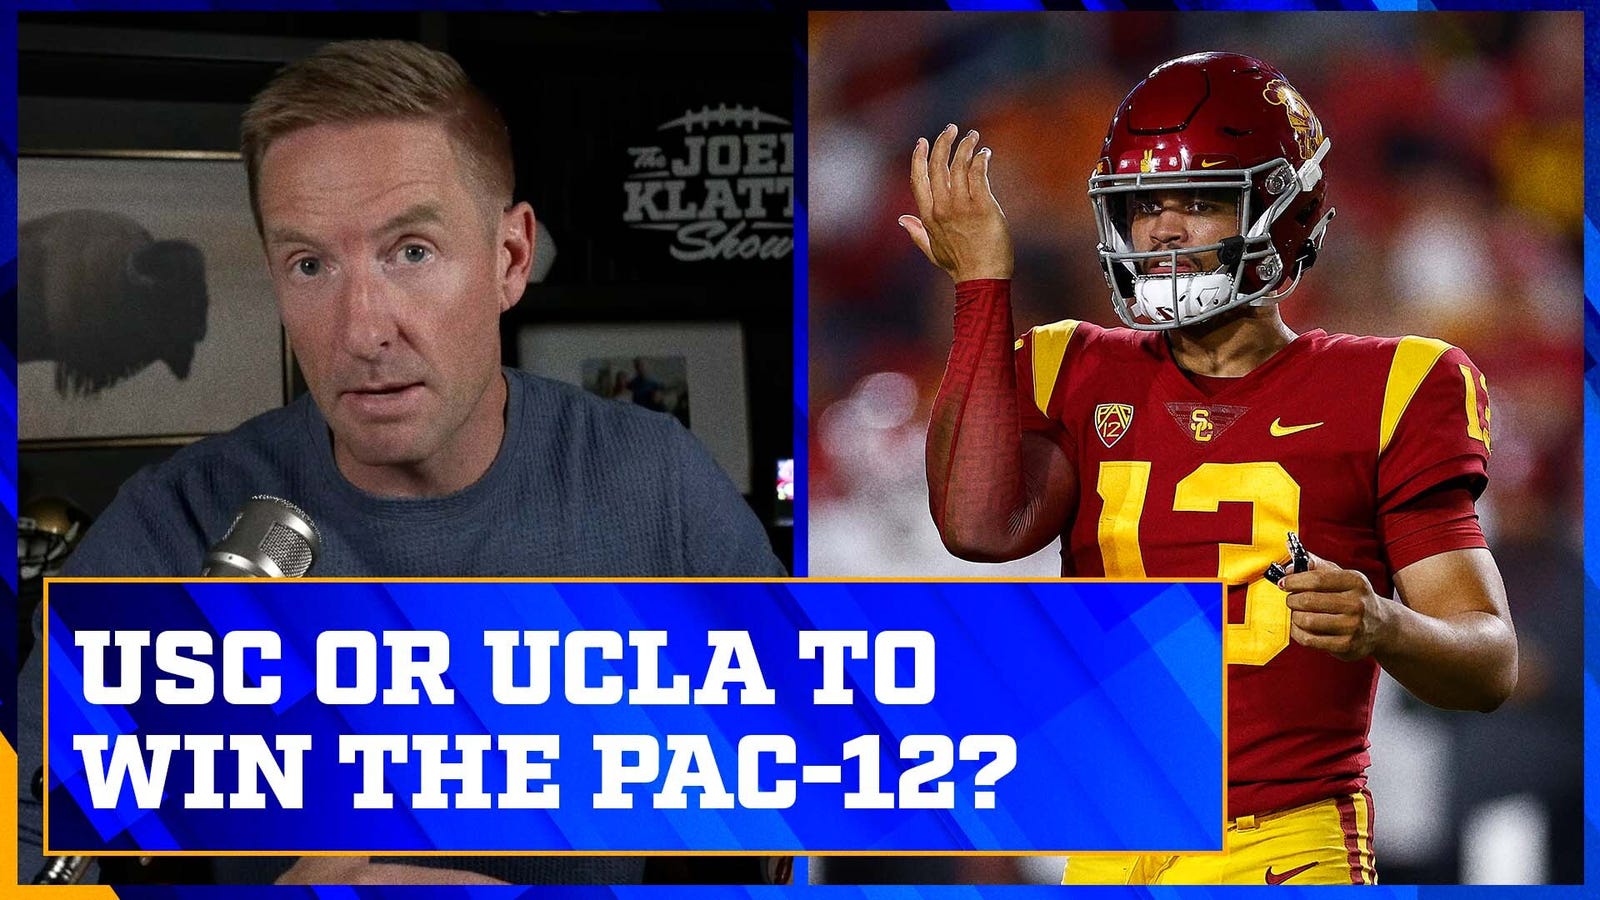 USC or UCLA to win the Pac-12?